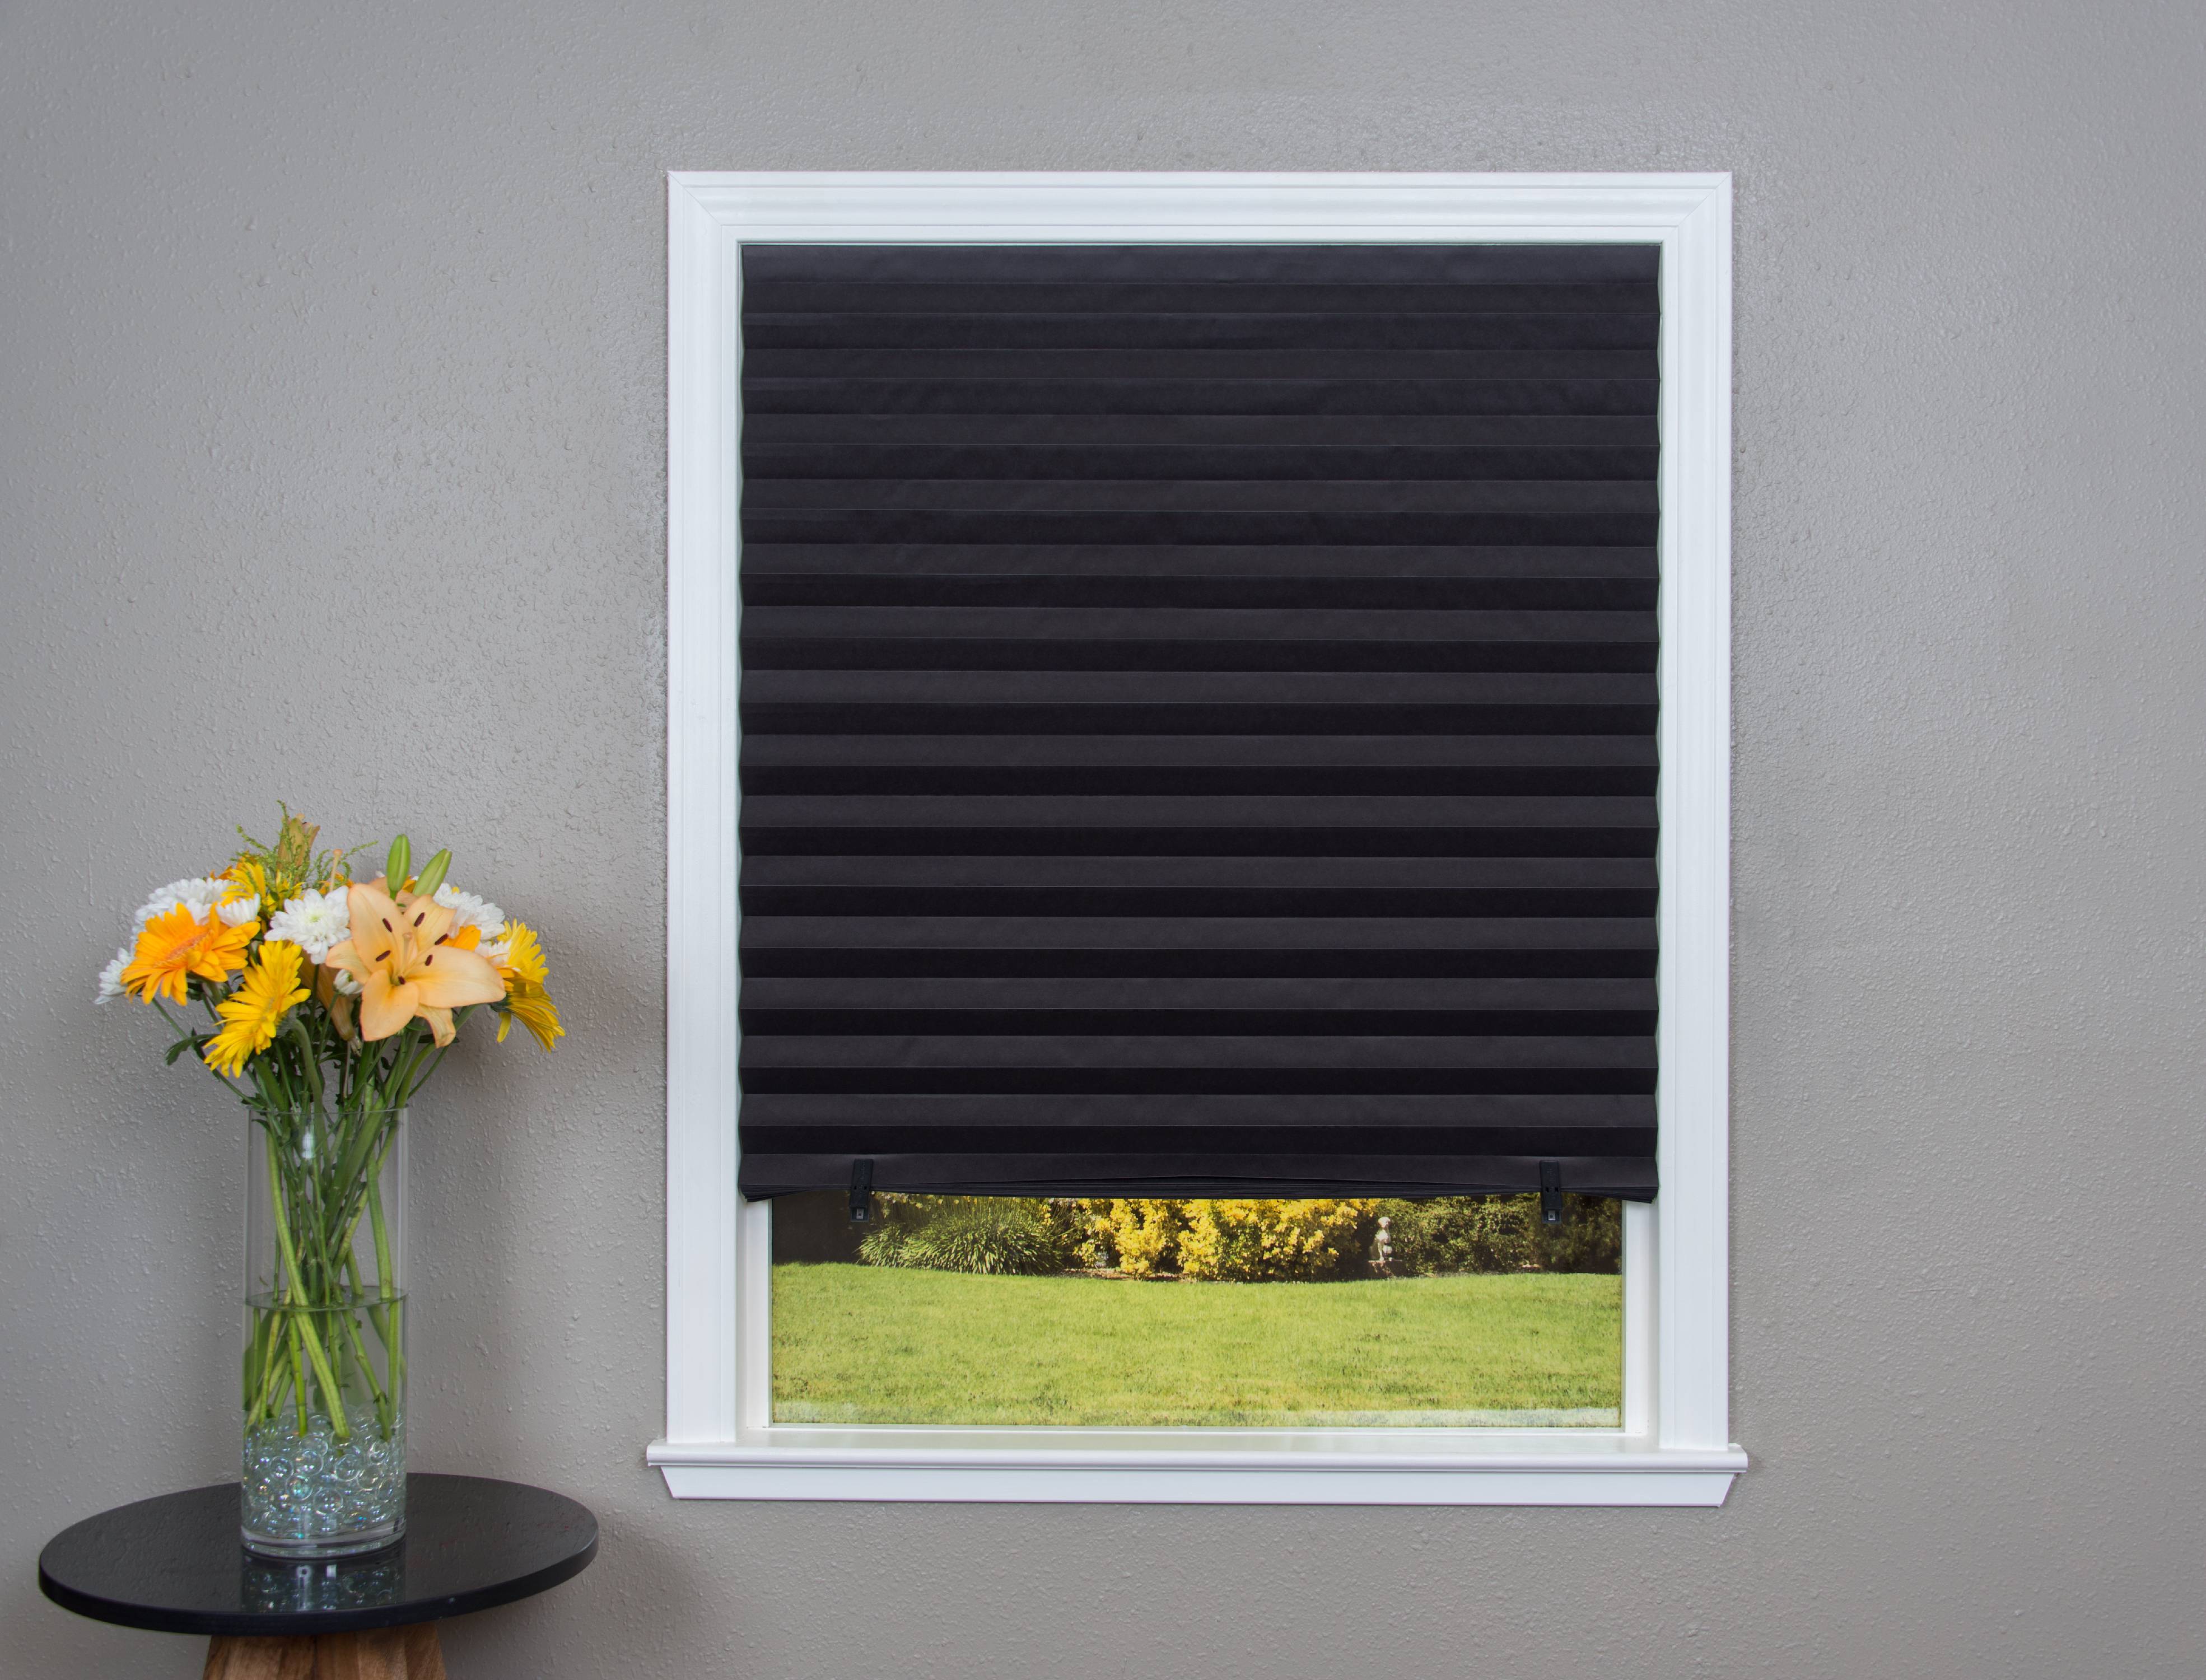 Redi Shade 36" x 72" Black Out Shade - image 1 of 2